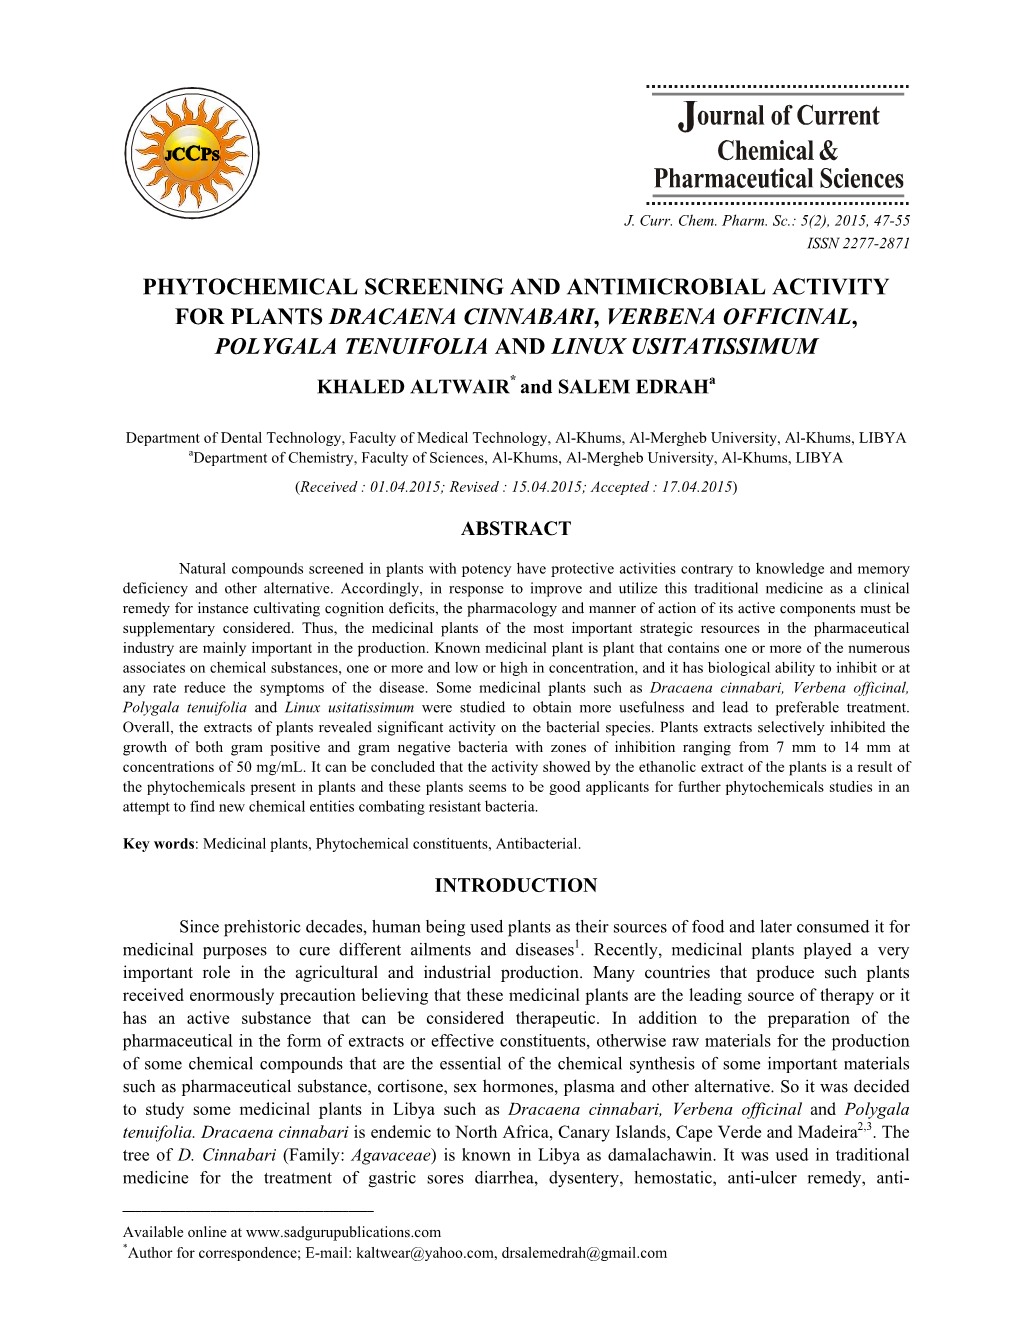 Phytochemical Screening and Antimicrobial Activity for Plants